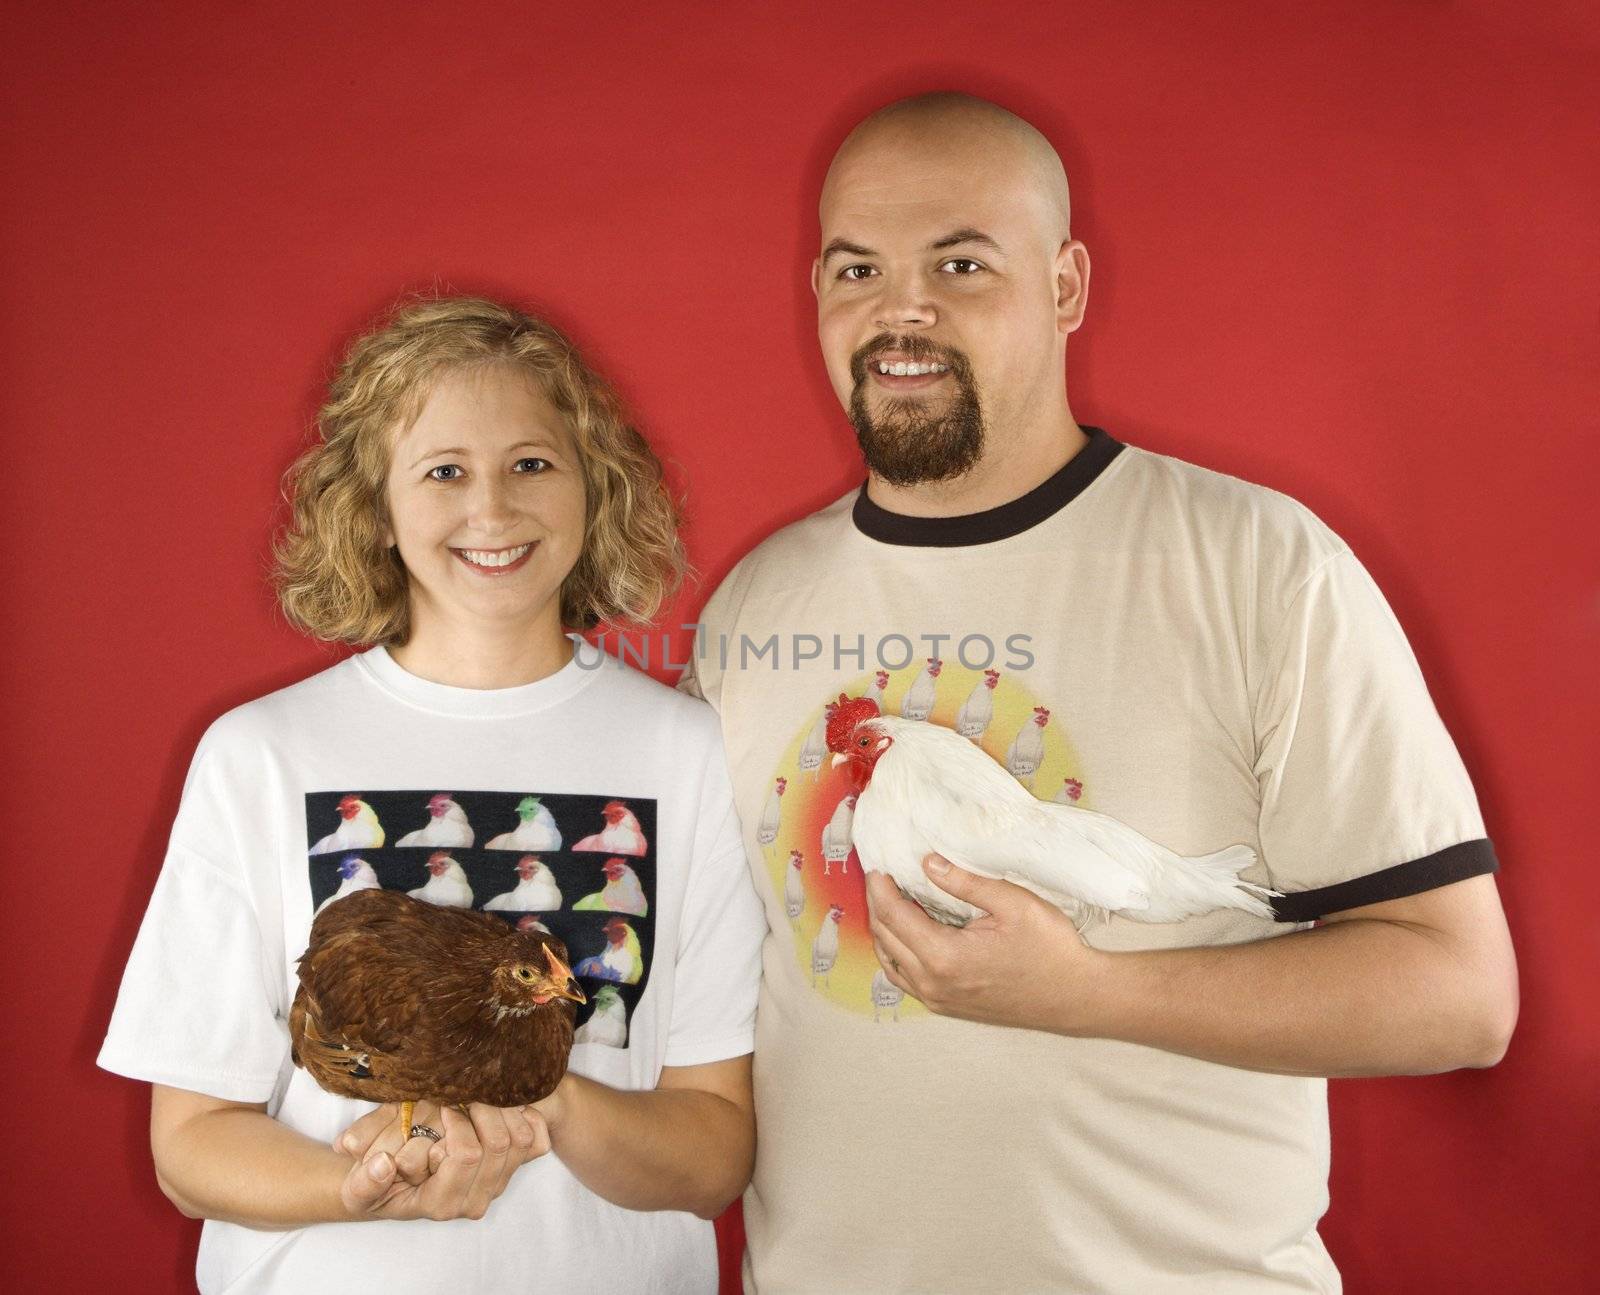 Caucasian mid-adult male and female holding chickens.